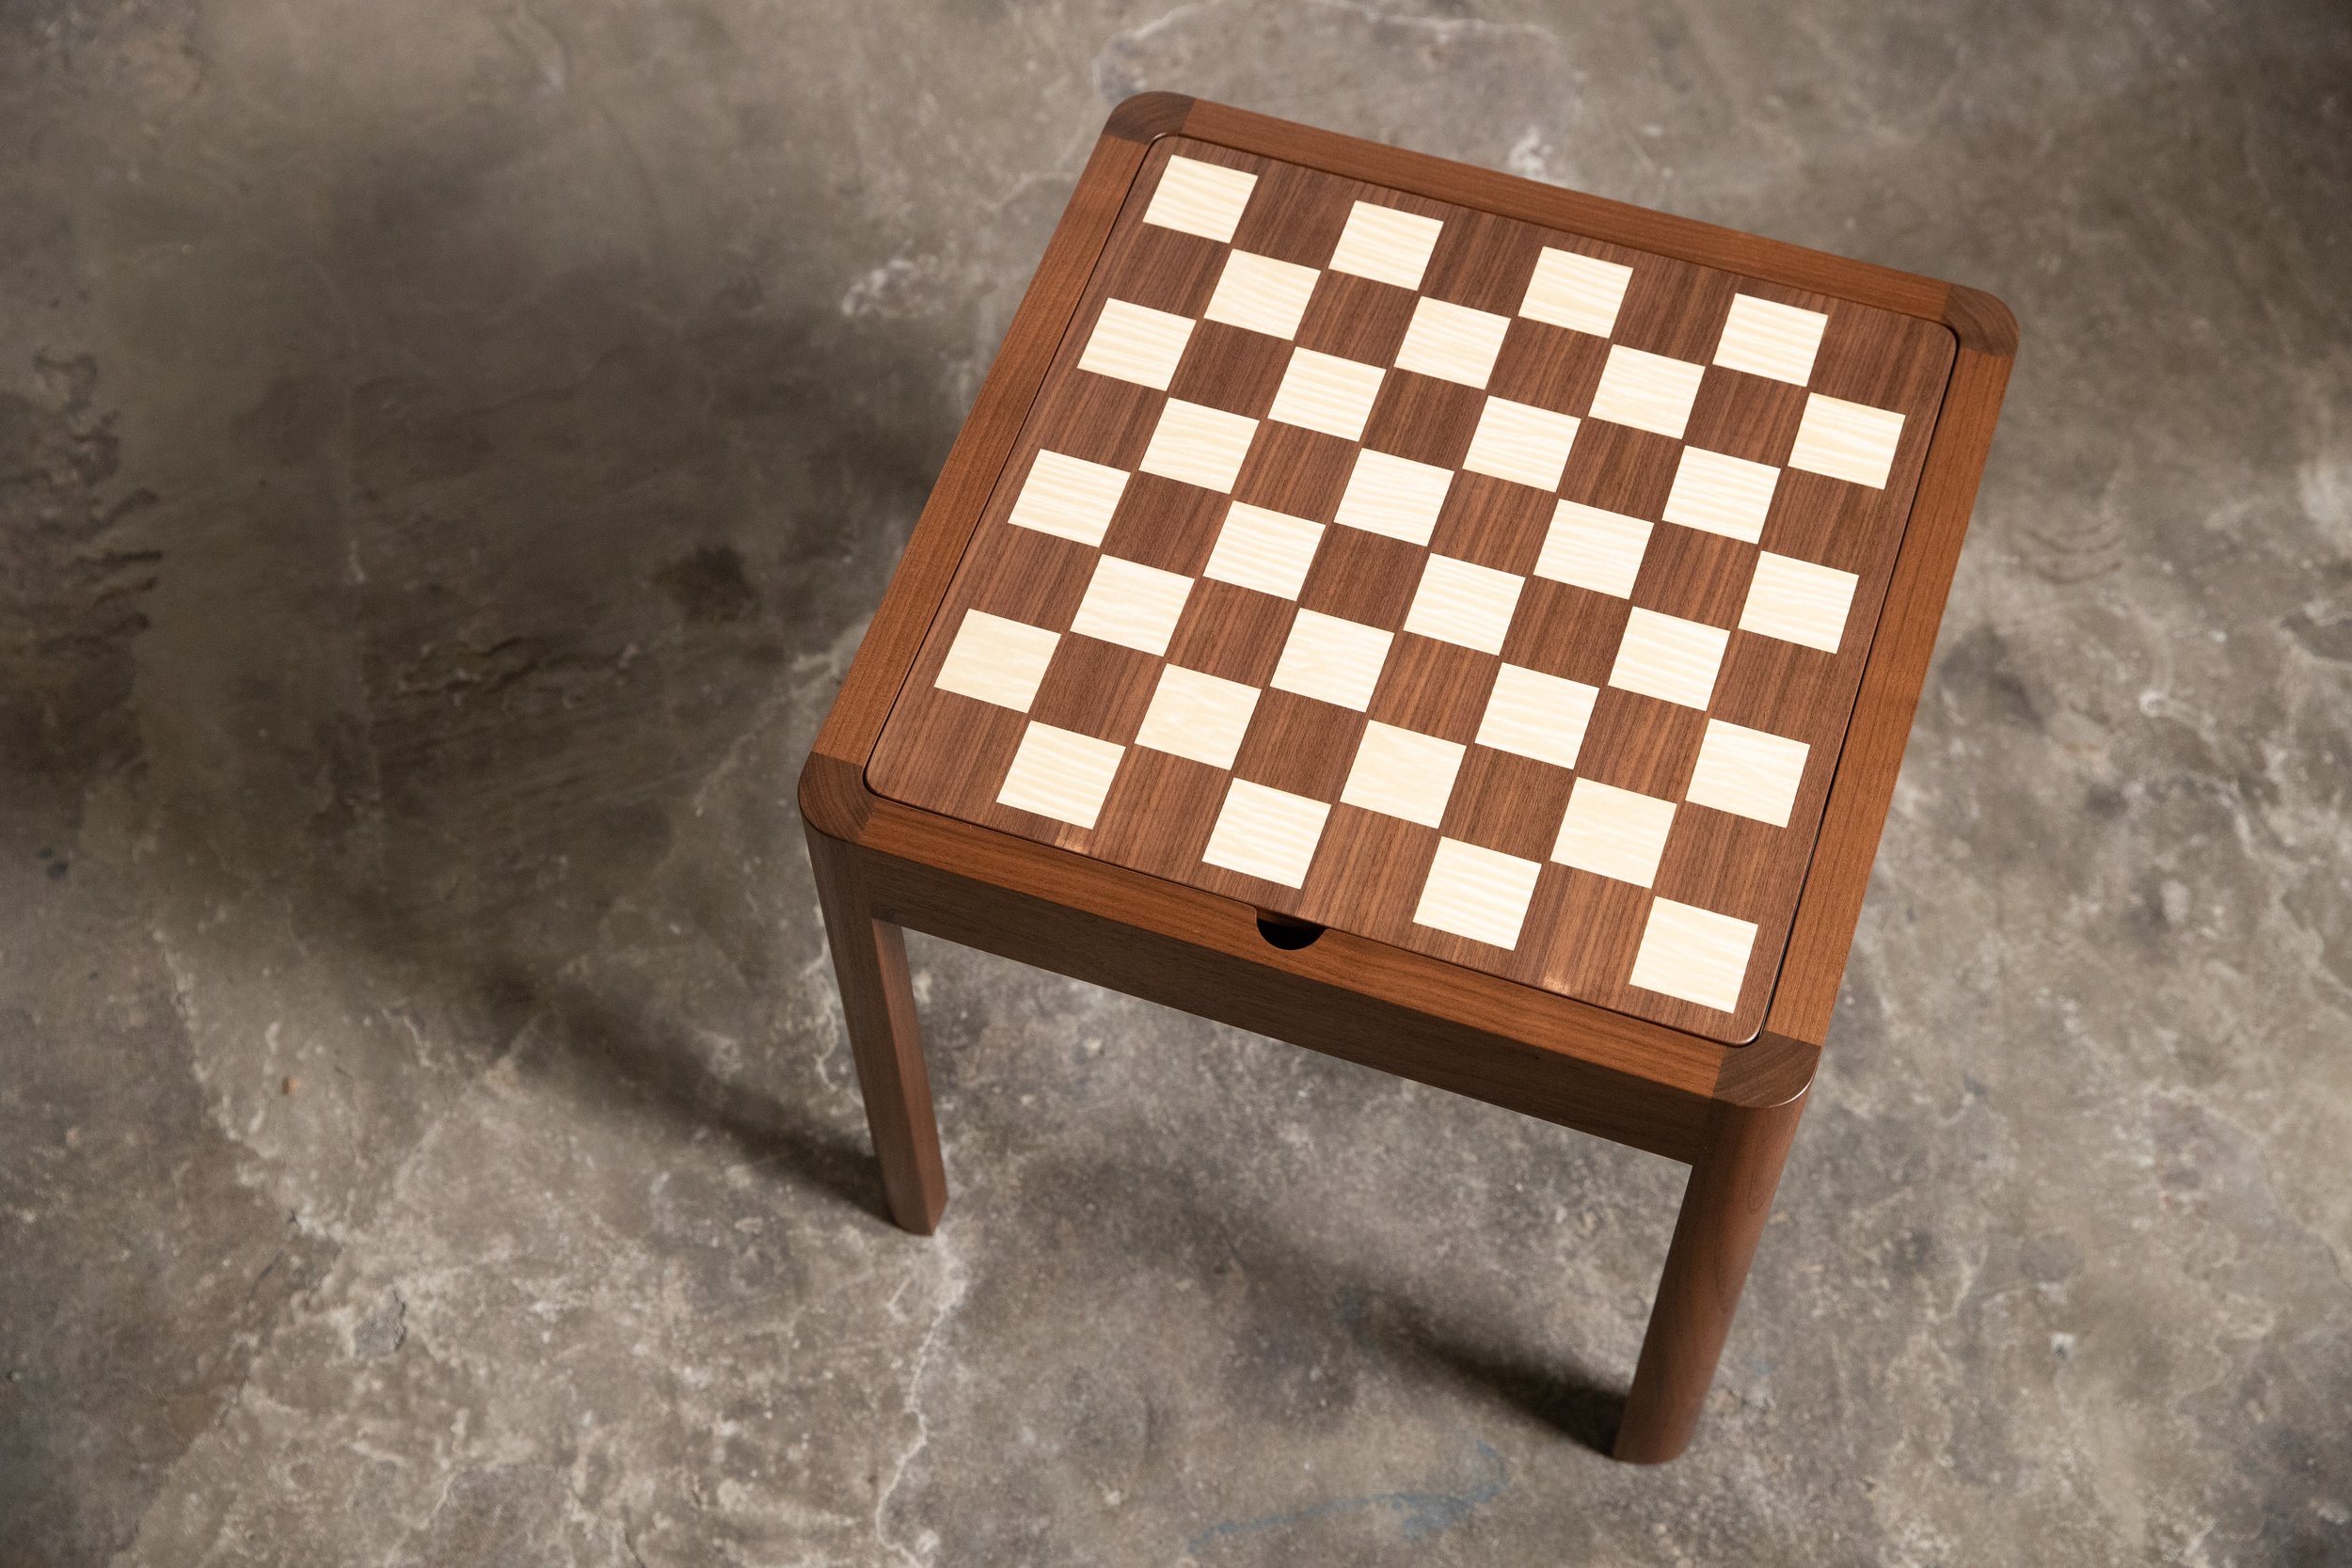 Handcrafted chess table